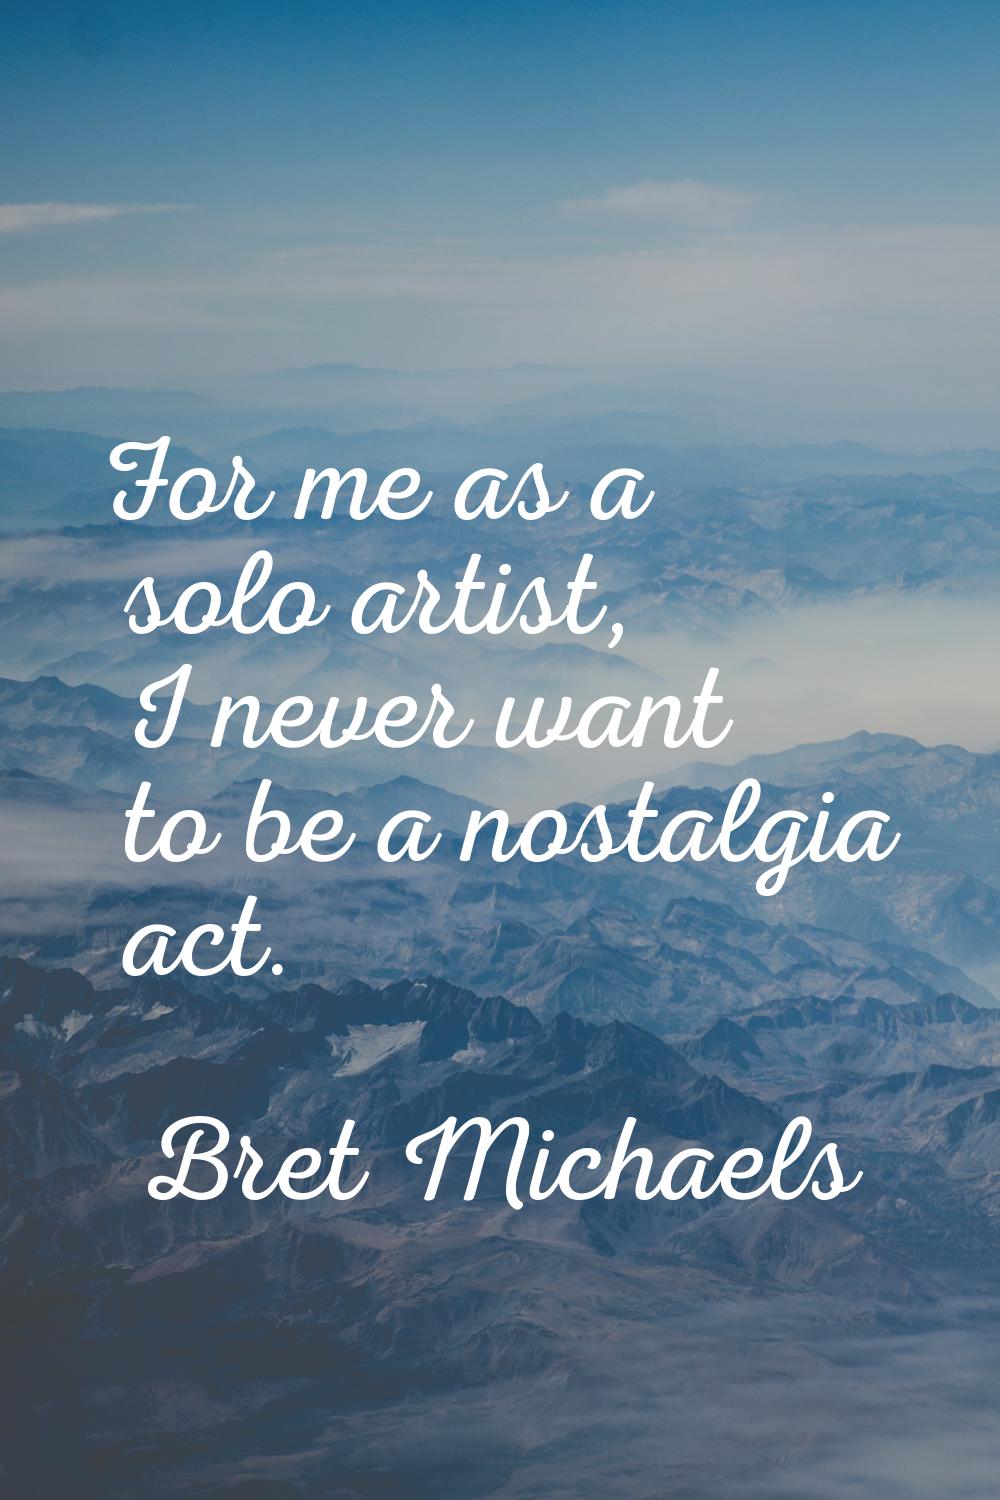 For me as a solo artist, I never want to be a nostalgia act.